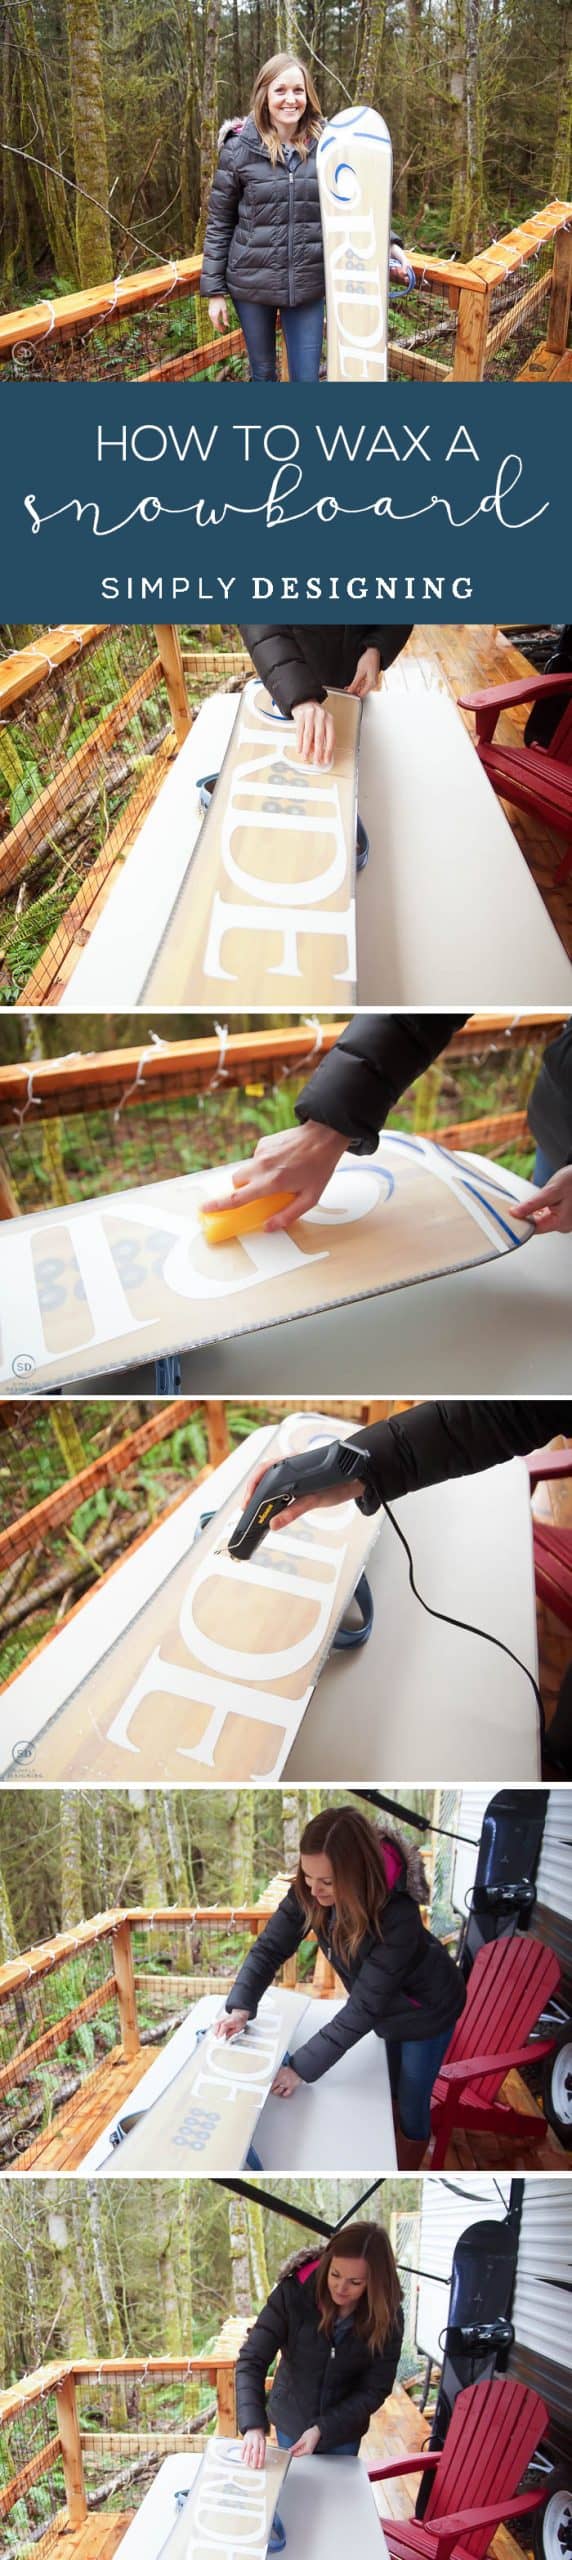 I am showing you How to Wax a Snowboard quickly so that your board will always be in good shape and you will be ready to fly down the slopes anytime